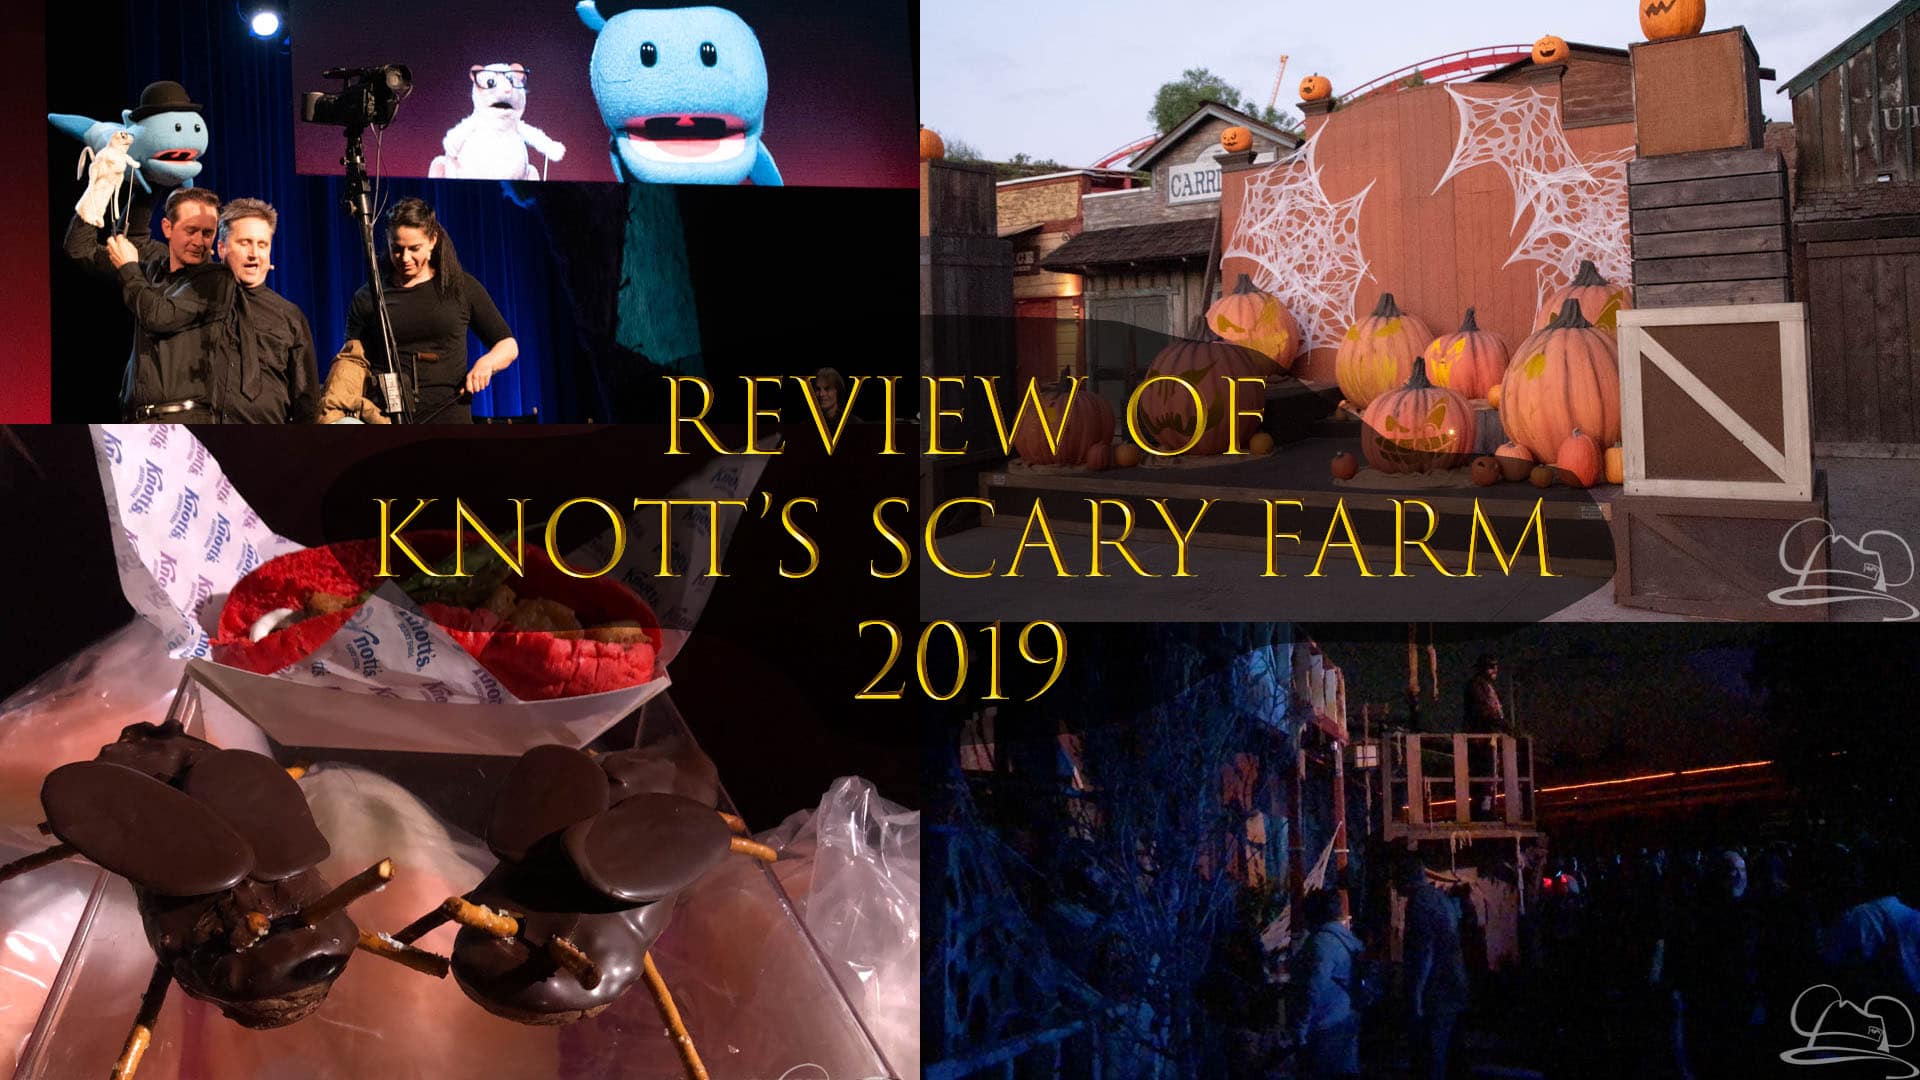 Knott’s Scary Farm 2019: More Monsters, More Frights, and More Puppets?